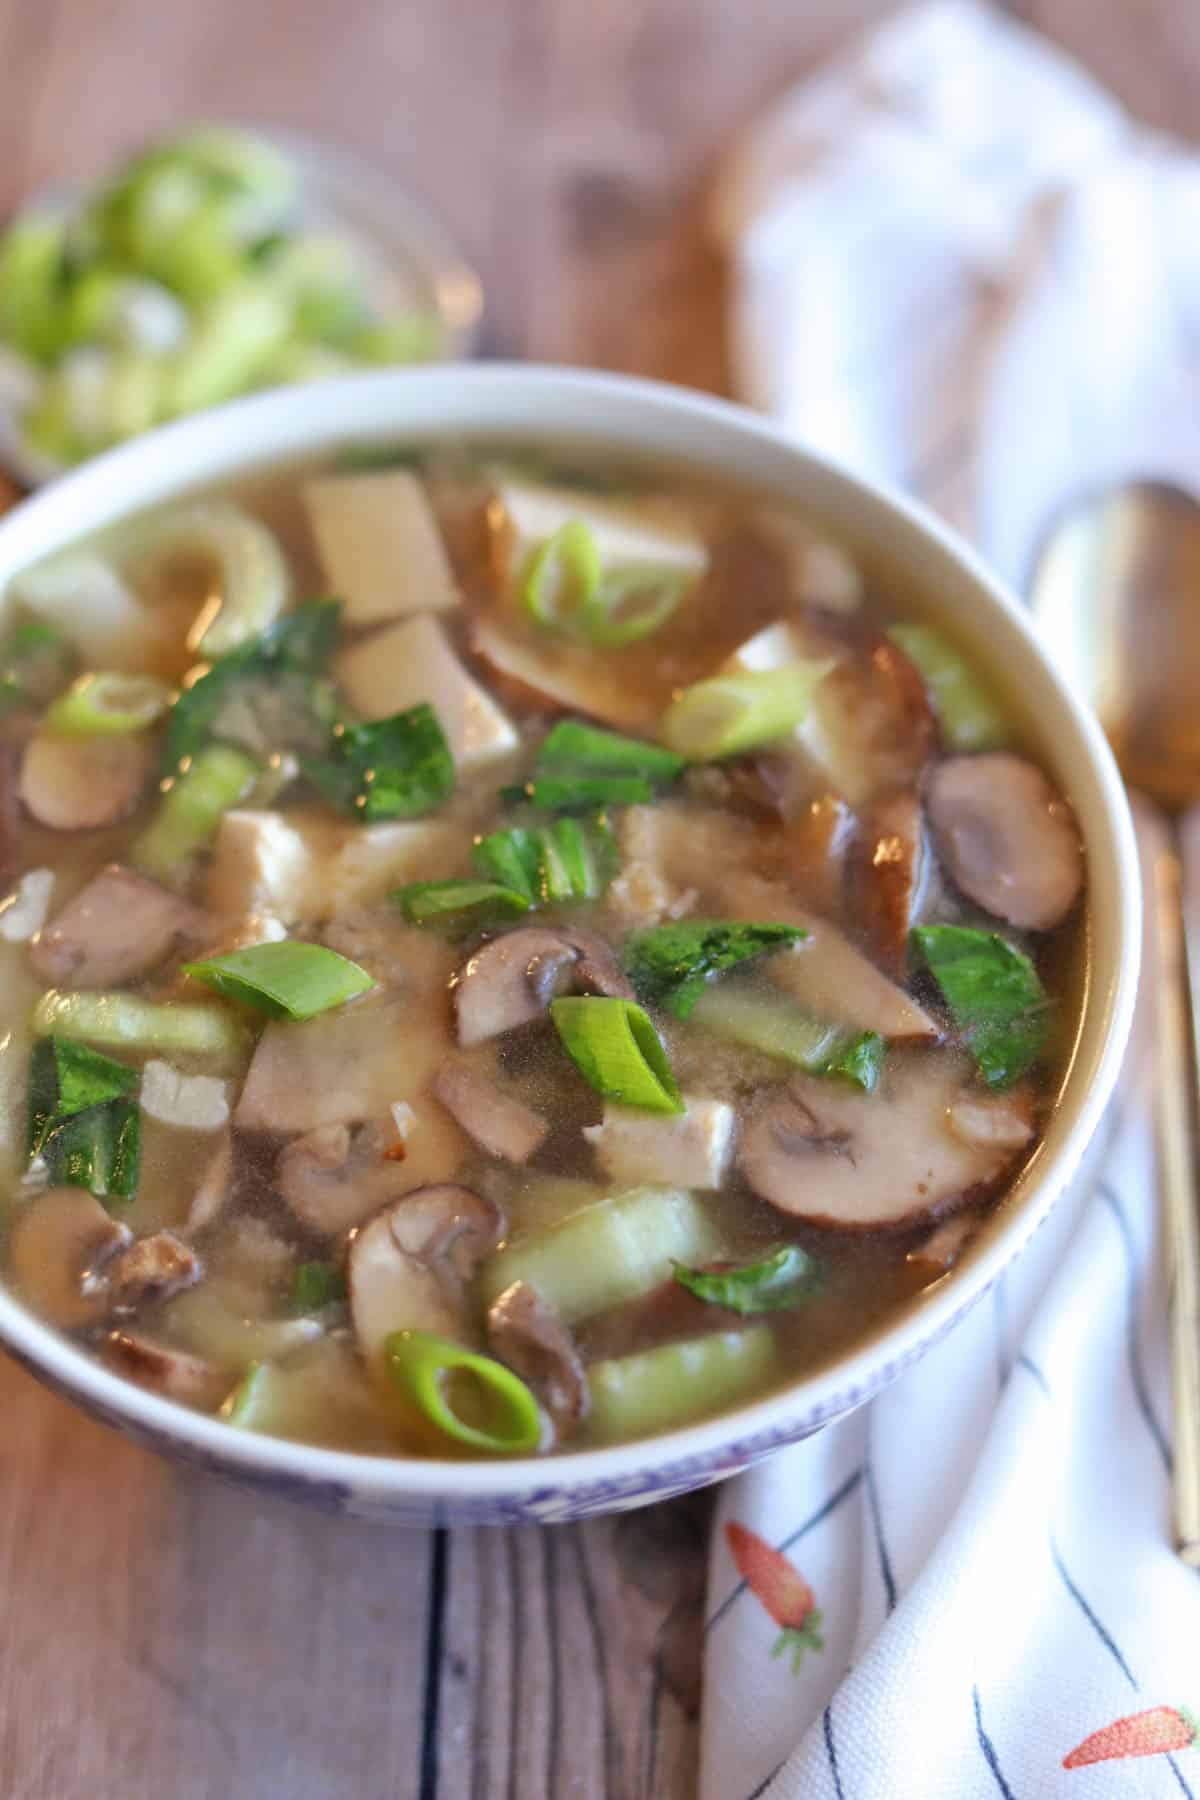 Close-up mushrooms and bok choy in miso soup.